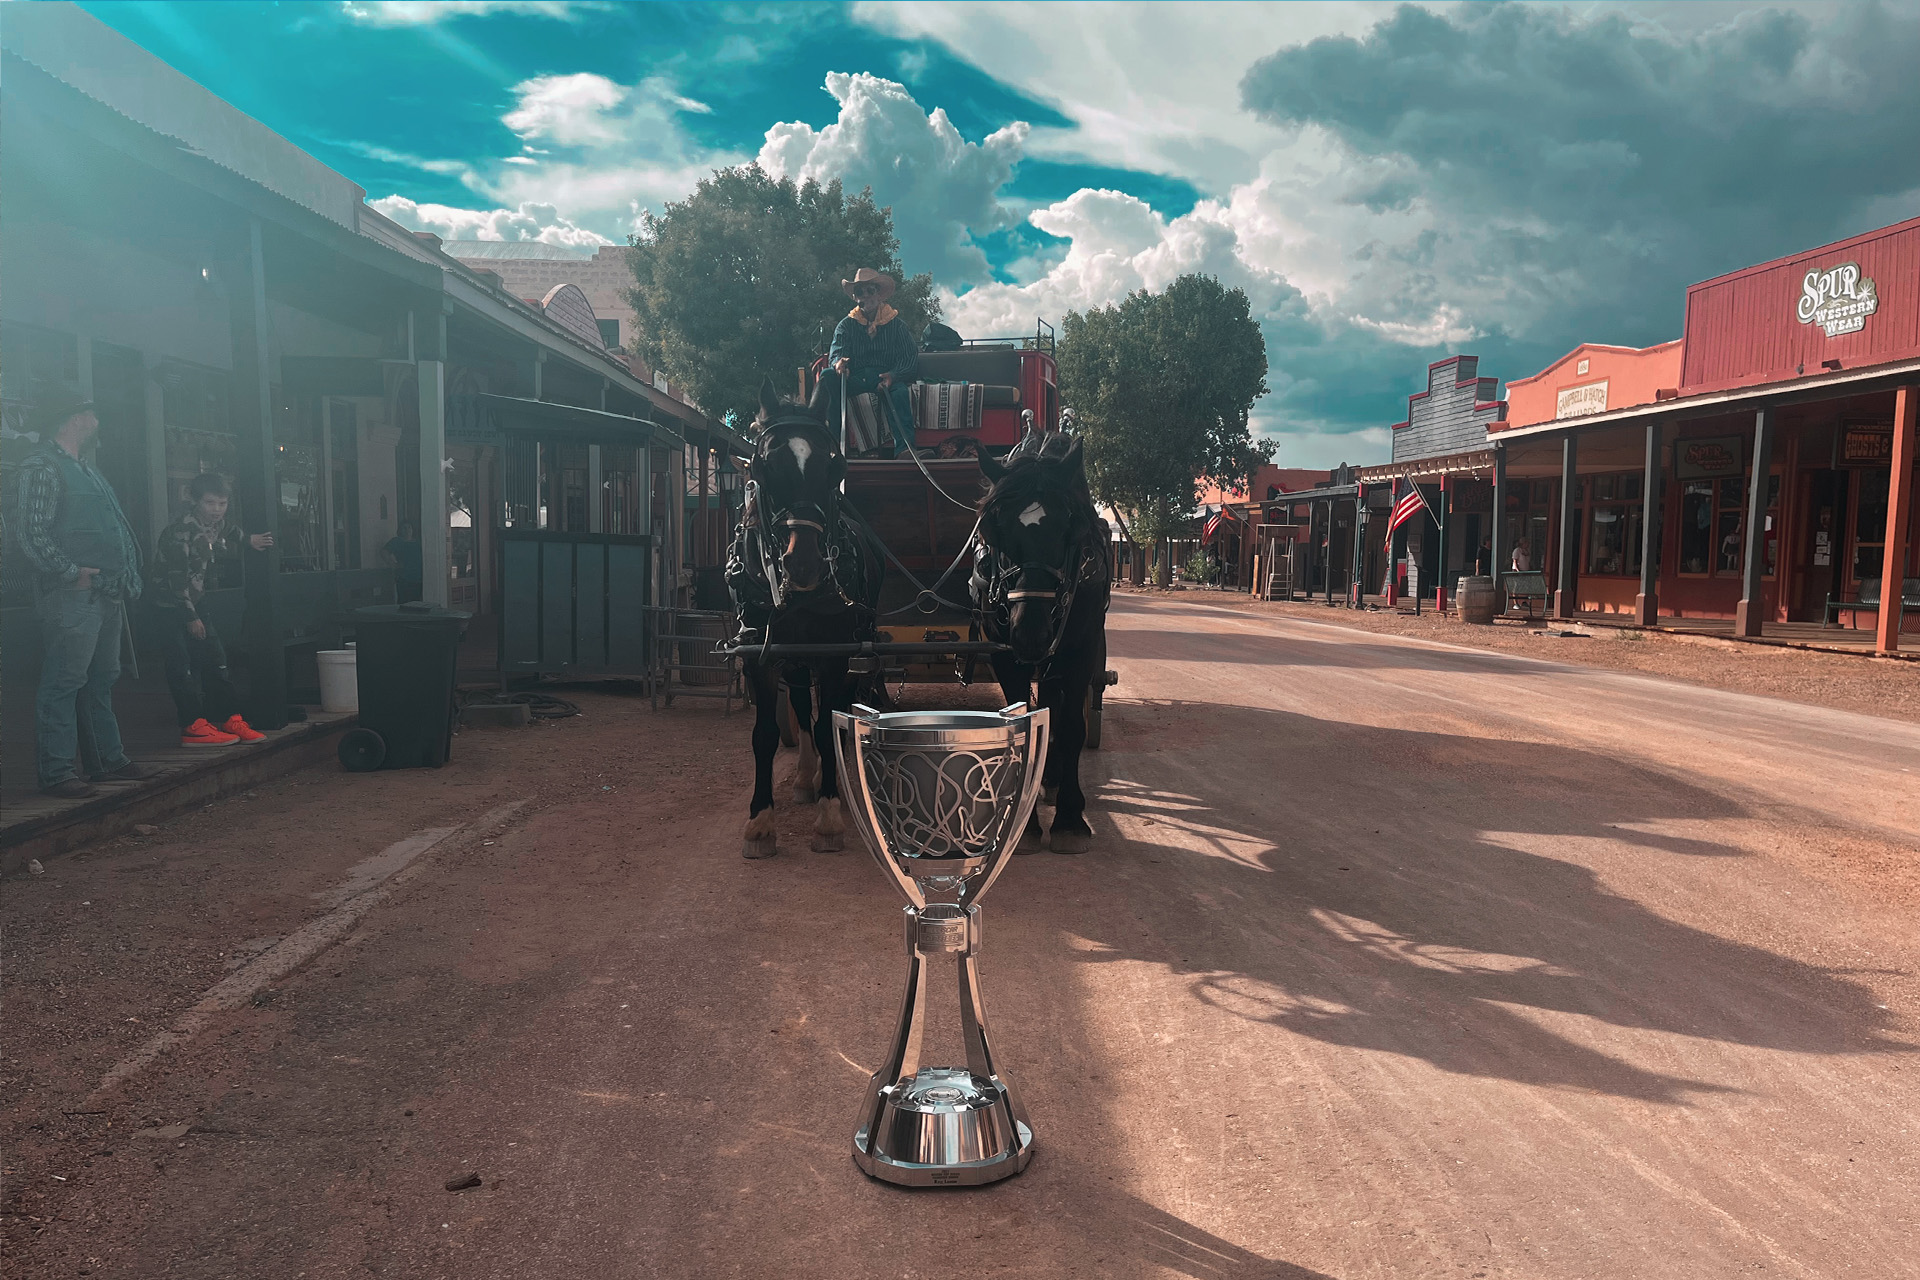 The Bill France Cup in front of a carriage with horses in the town of Tombstone